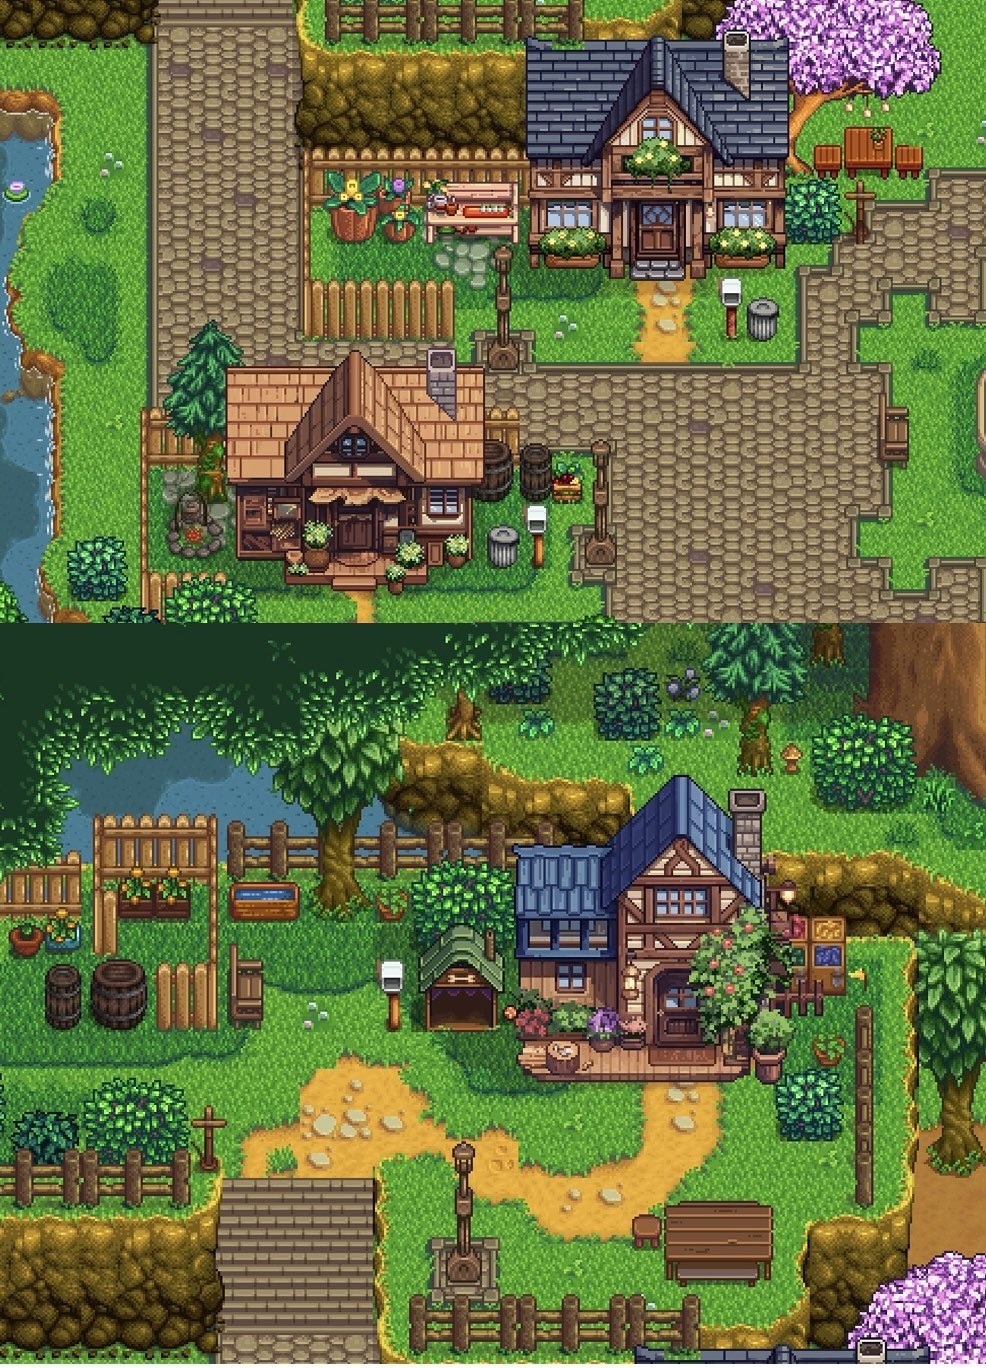 A group of modders are building 'Baldur's Village' in Stardew Valley, an idyllic little town where you can date Astarion and maybe hang out with some of those other guys